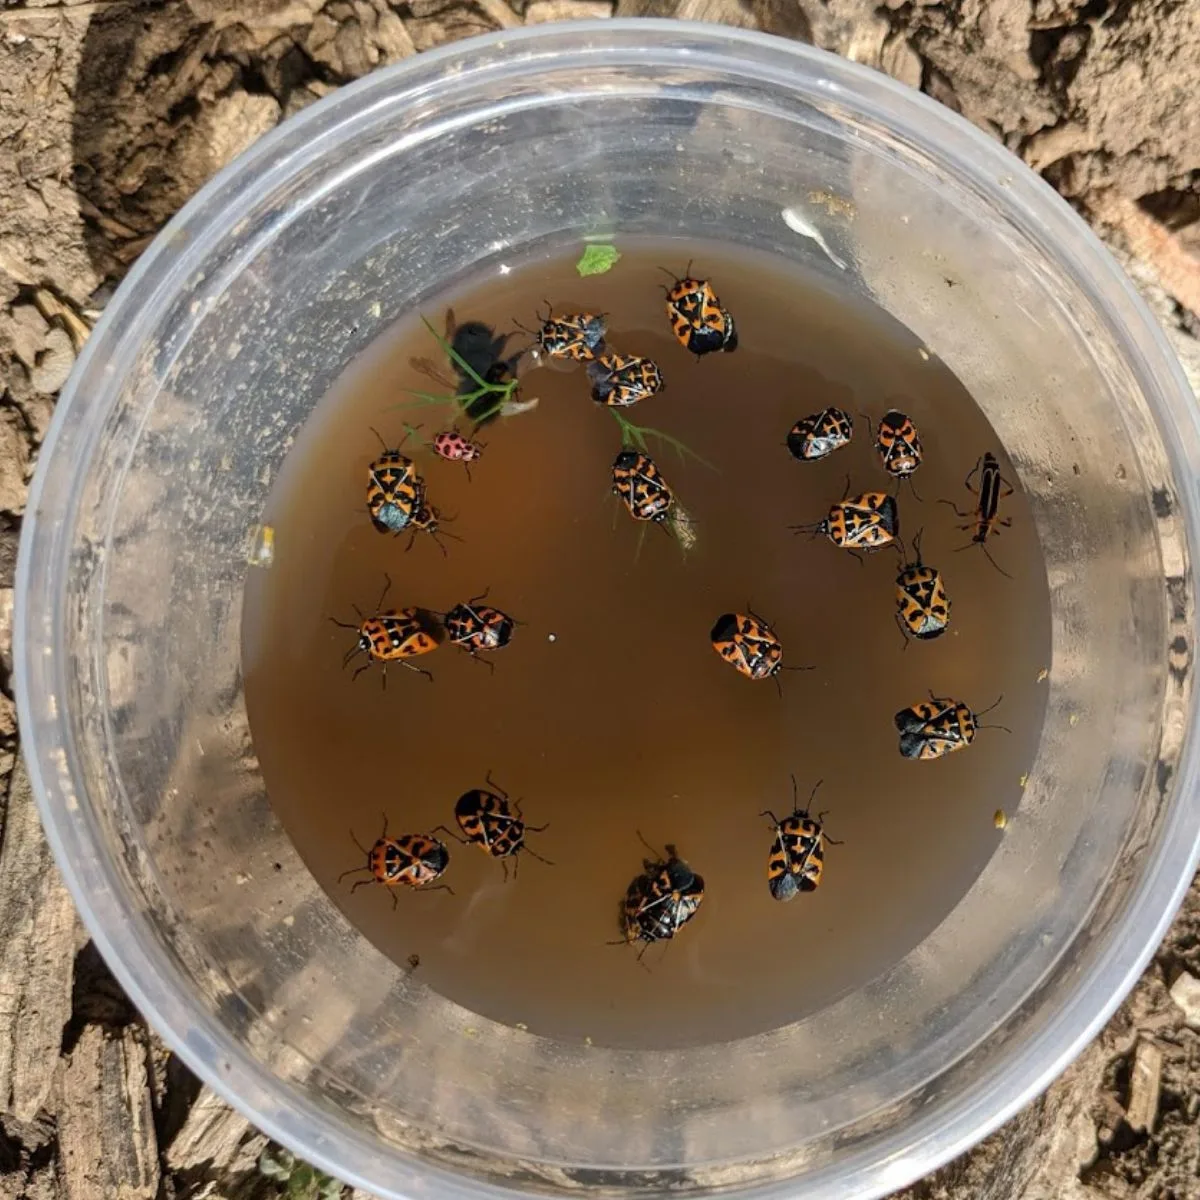 harlequin bugs floating in soapy water